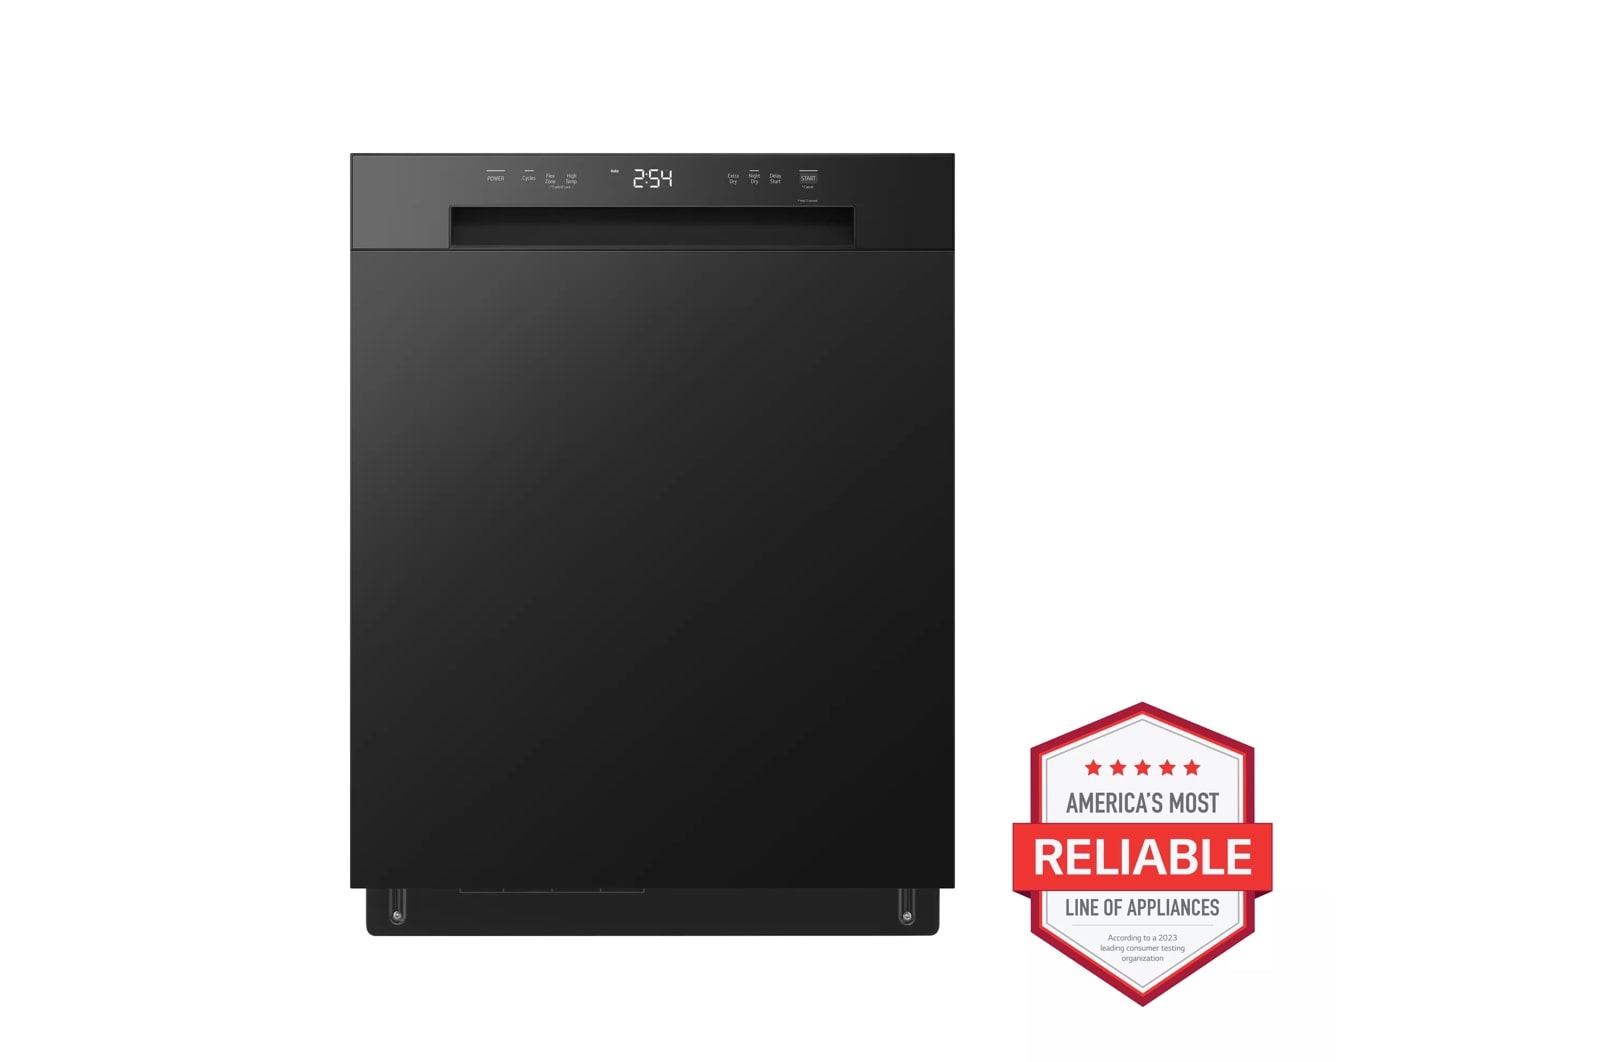 Lg LDFC2423V Front Control Dishwasher With Lodecibel Operation And Dynamic  Dry™